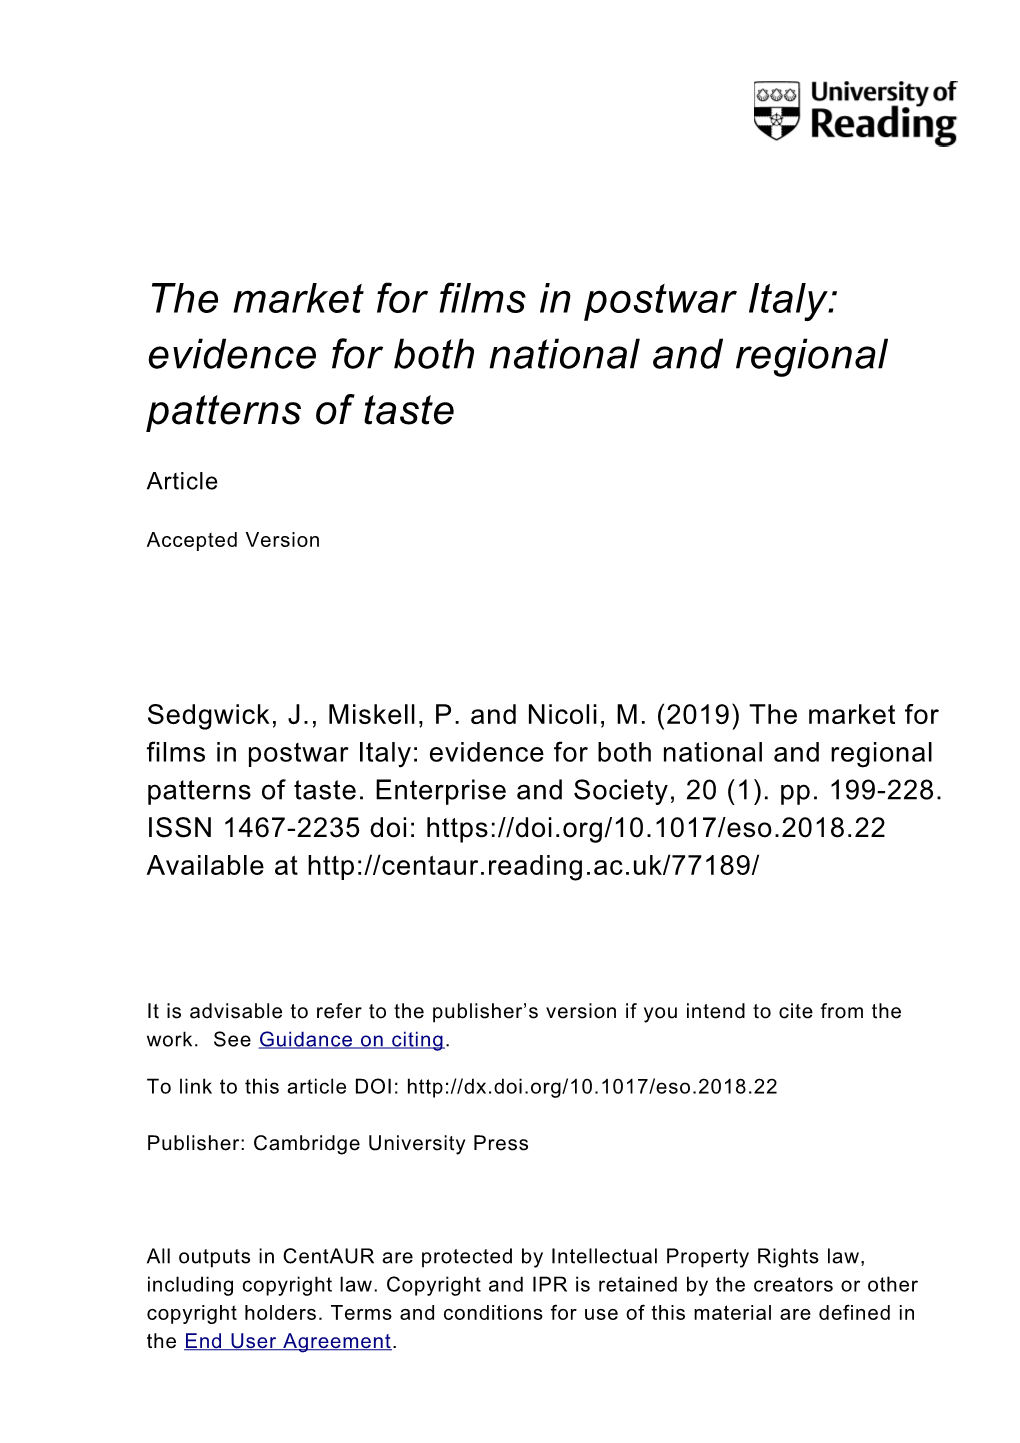 The Market for Films in Postwar Italy: Evidence for Both National and Regional Patterns of Taste